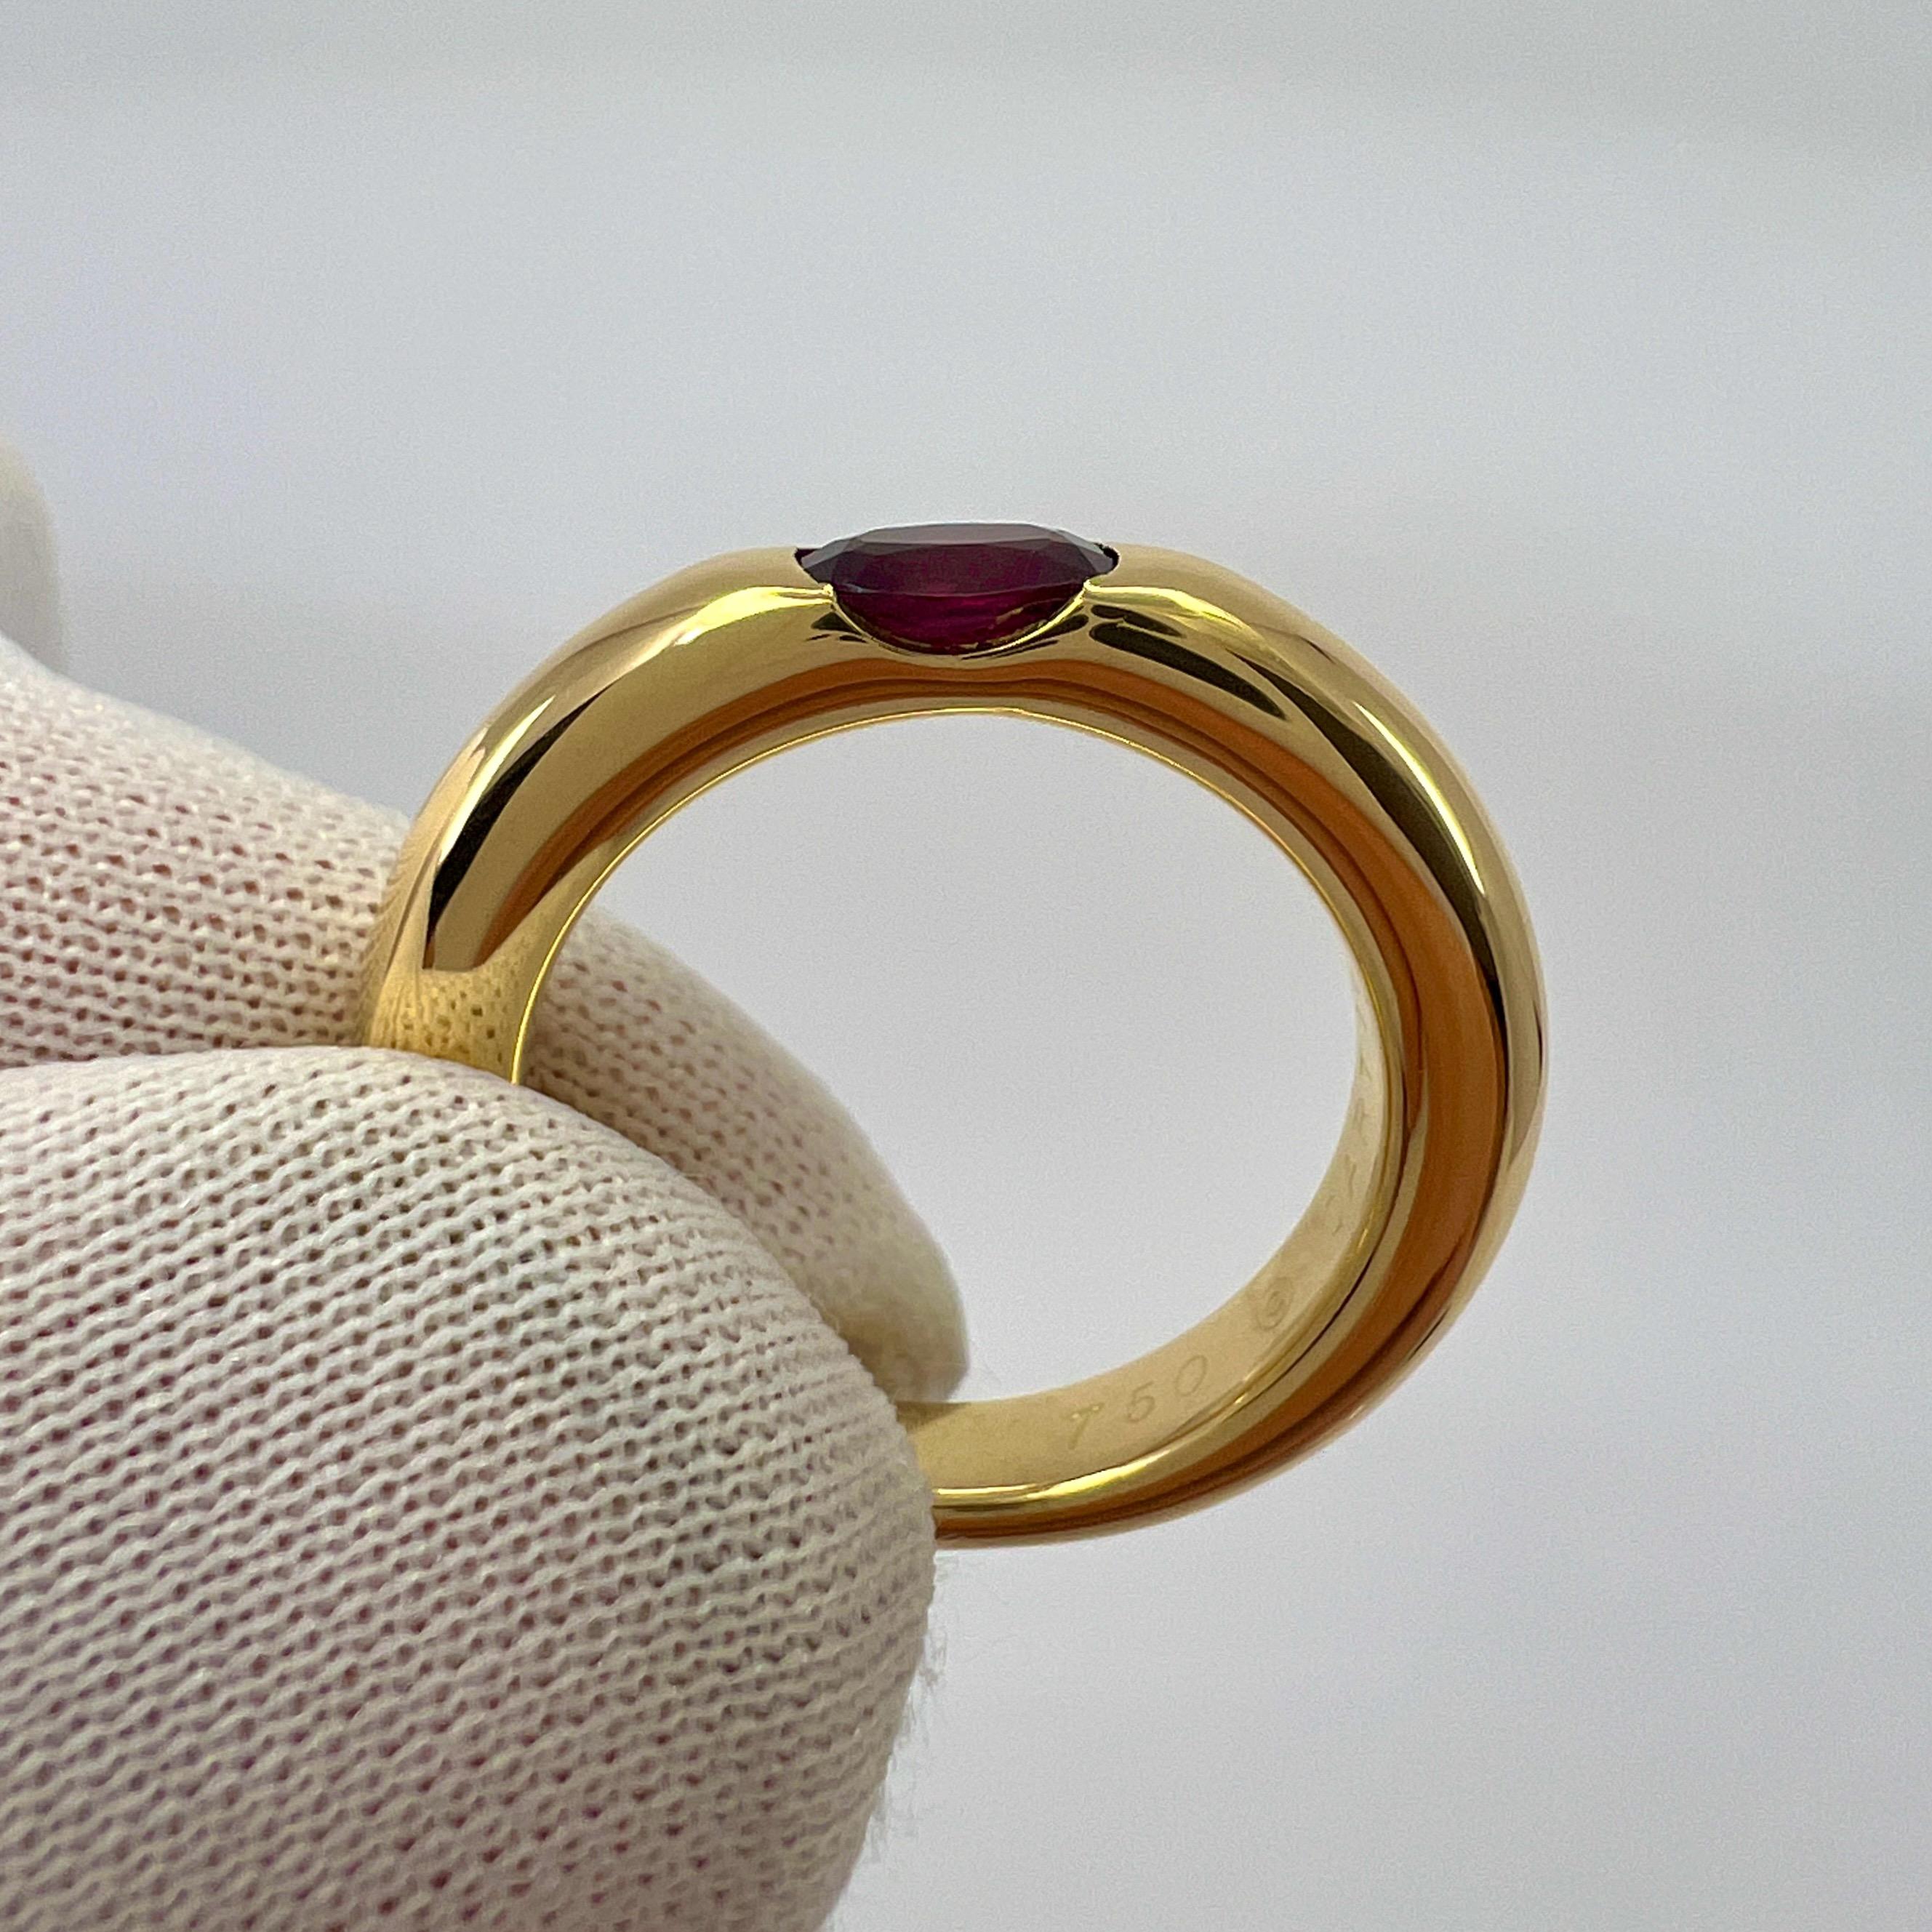 Vintage Cartier Deep Red Ruby Ellipse 18k Yellow Gold Oval Solitaire Ring 50 US5 5